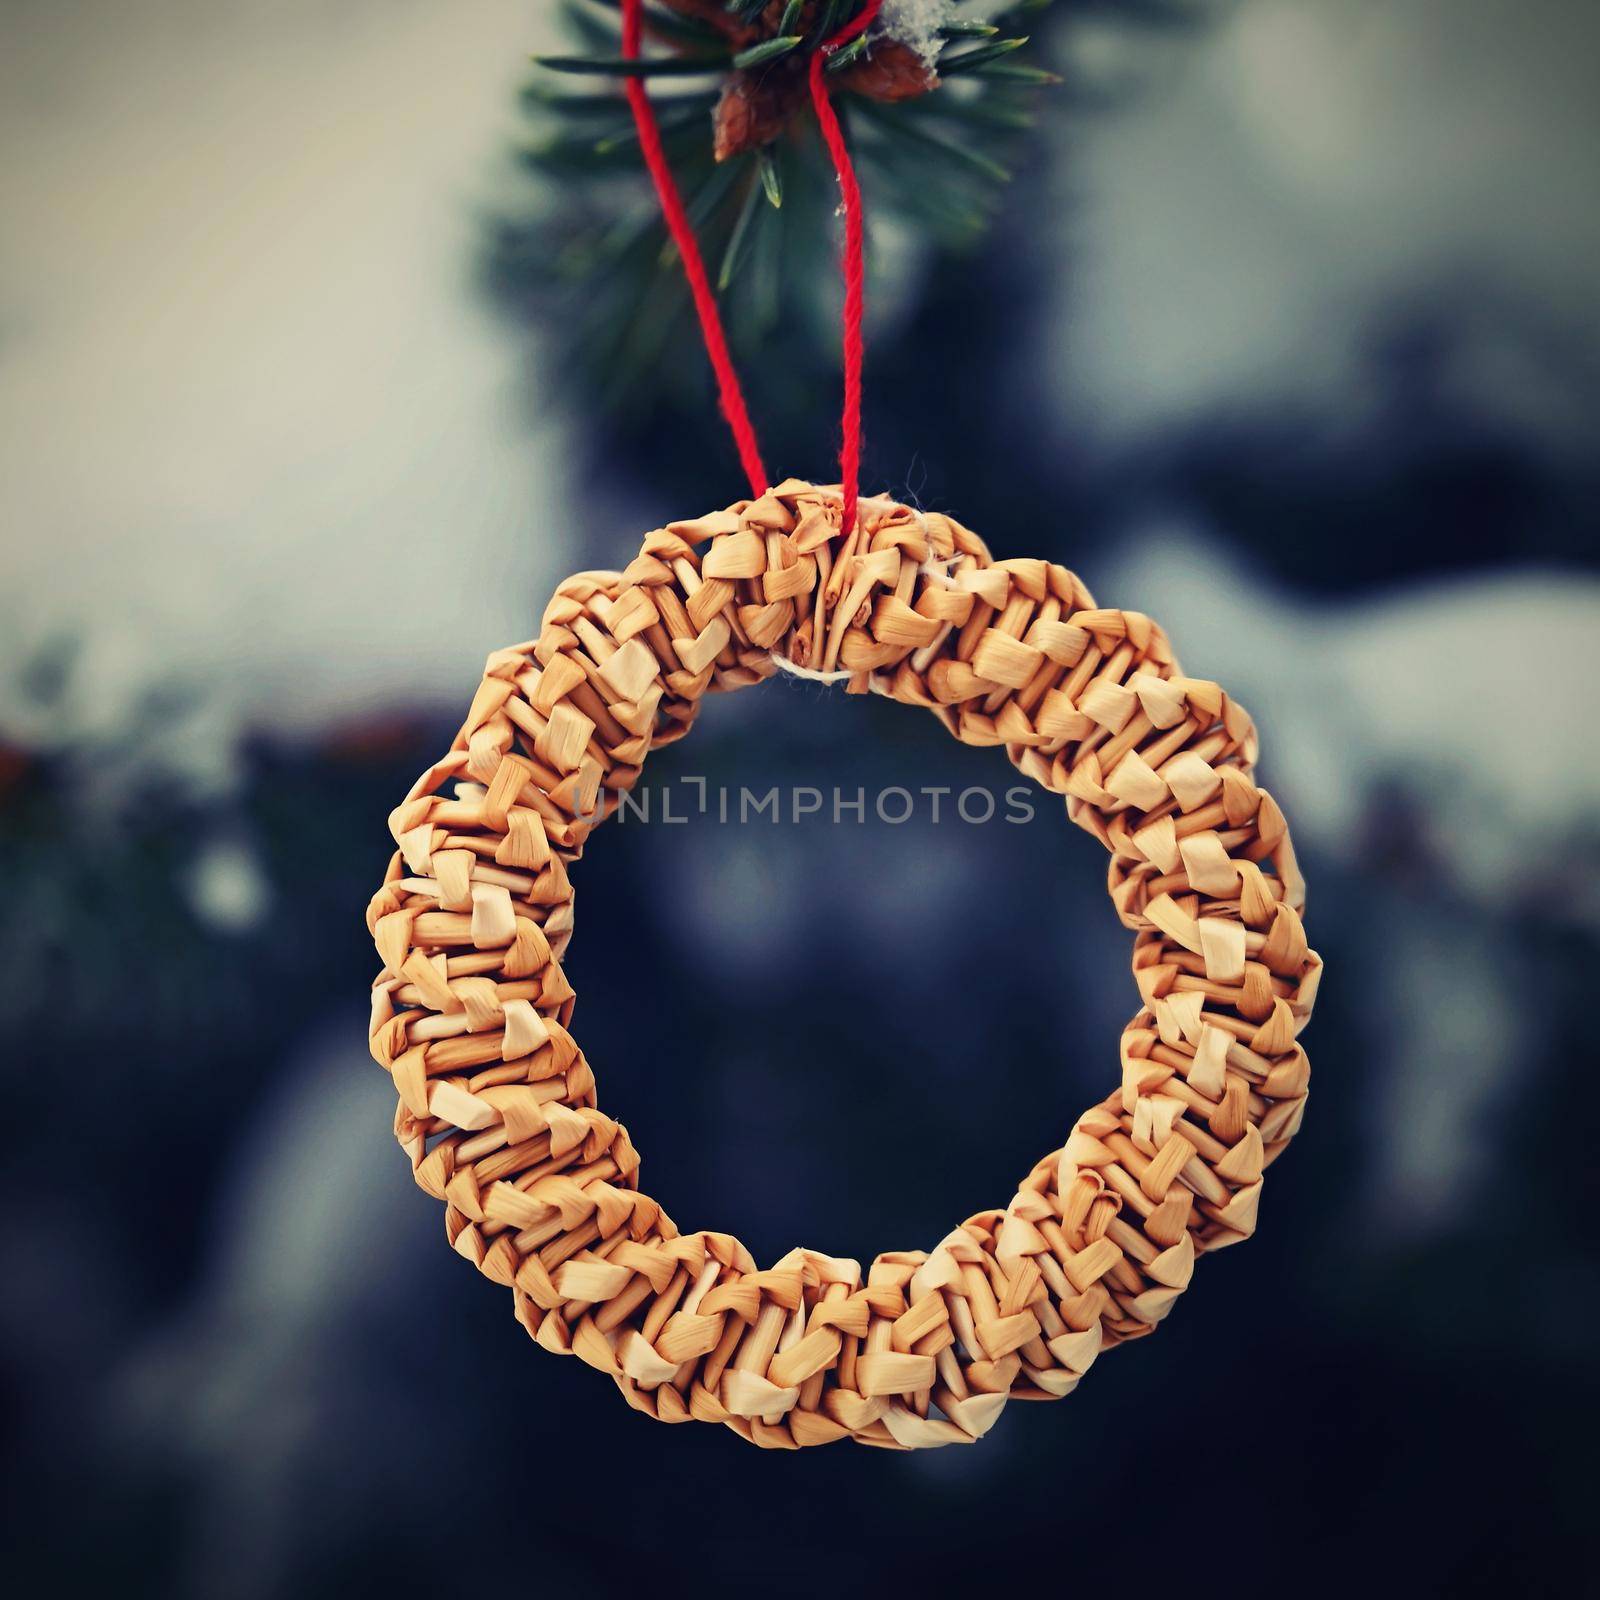 Beautiful natural Christmas decorations made of straw on a snowy Christmas tree. Winter nature colorful outdoor background for the holidays.